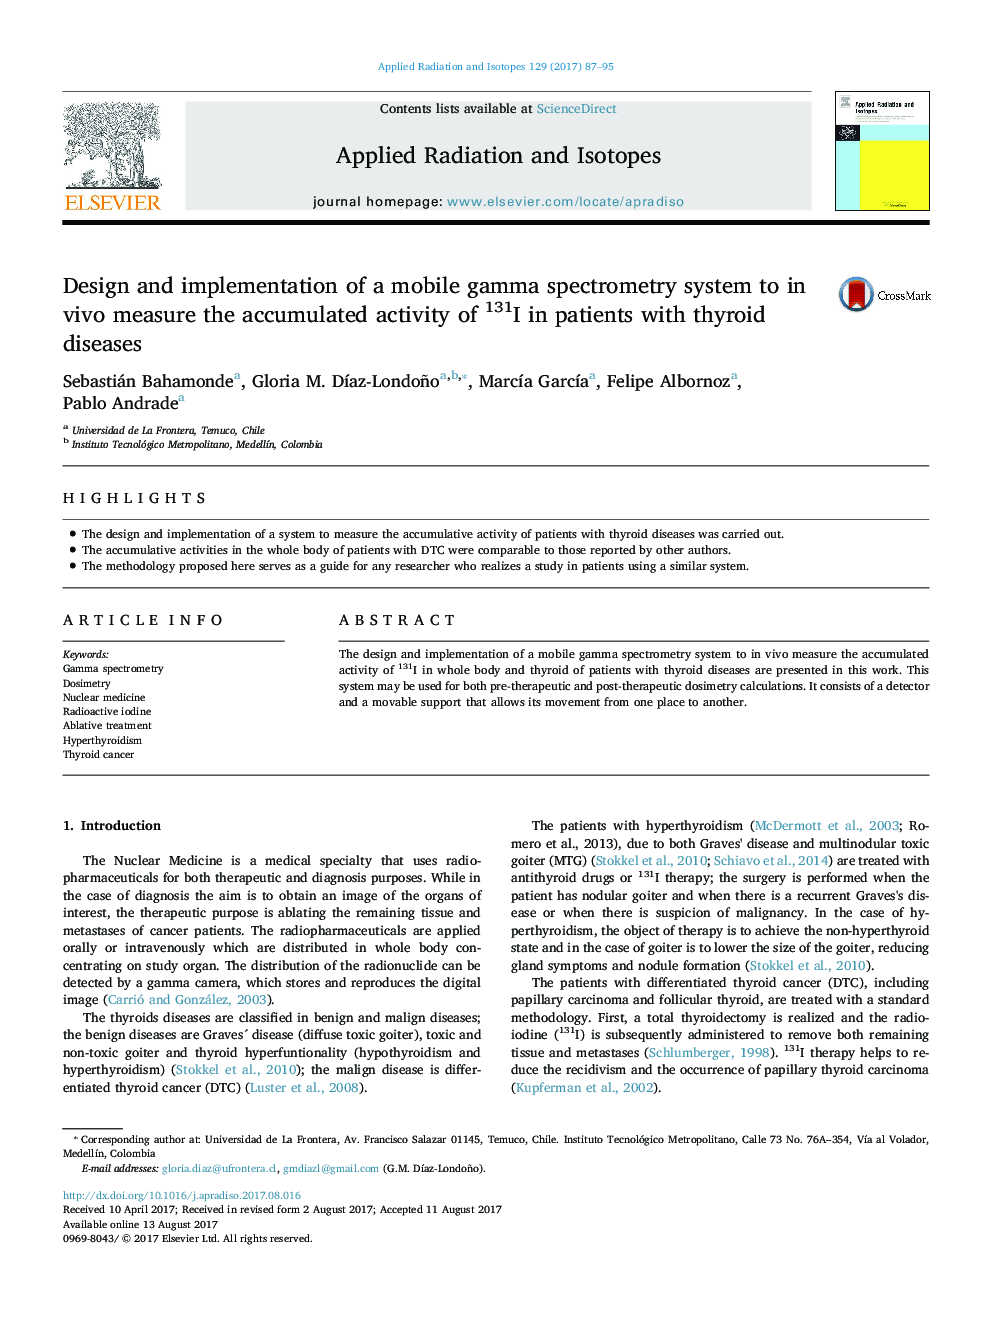 Design and implementation of a mobile gamma spectrometry system to in vivo measure the accumulated activity of 131I in patients with thyroid diseases